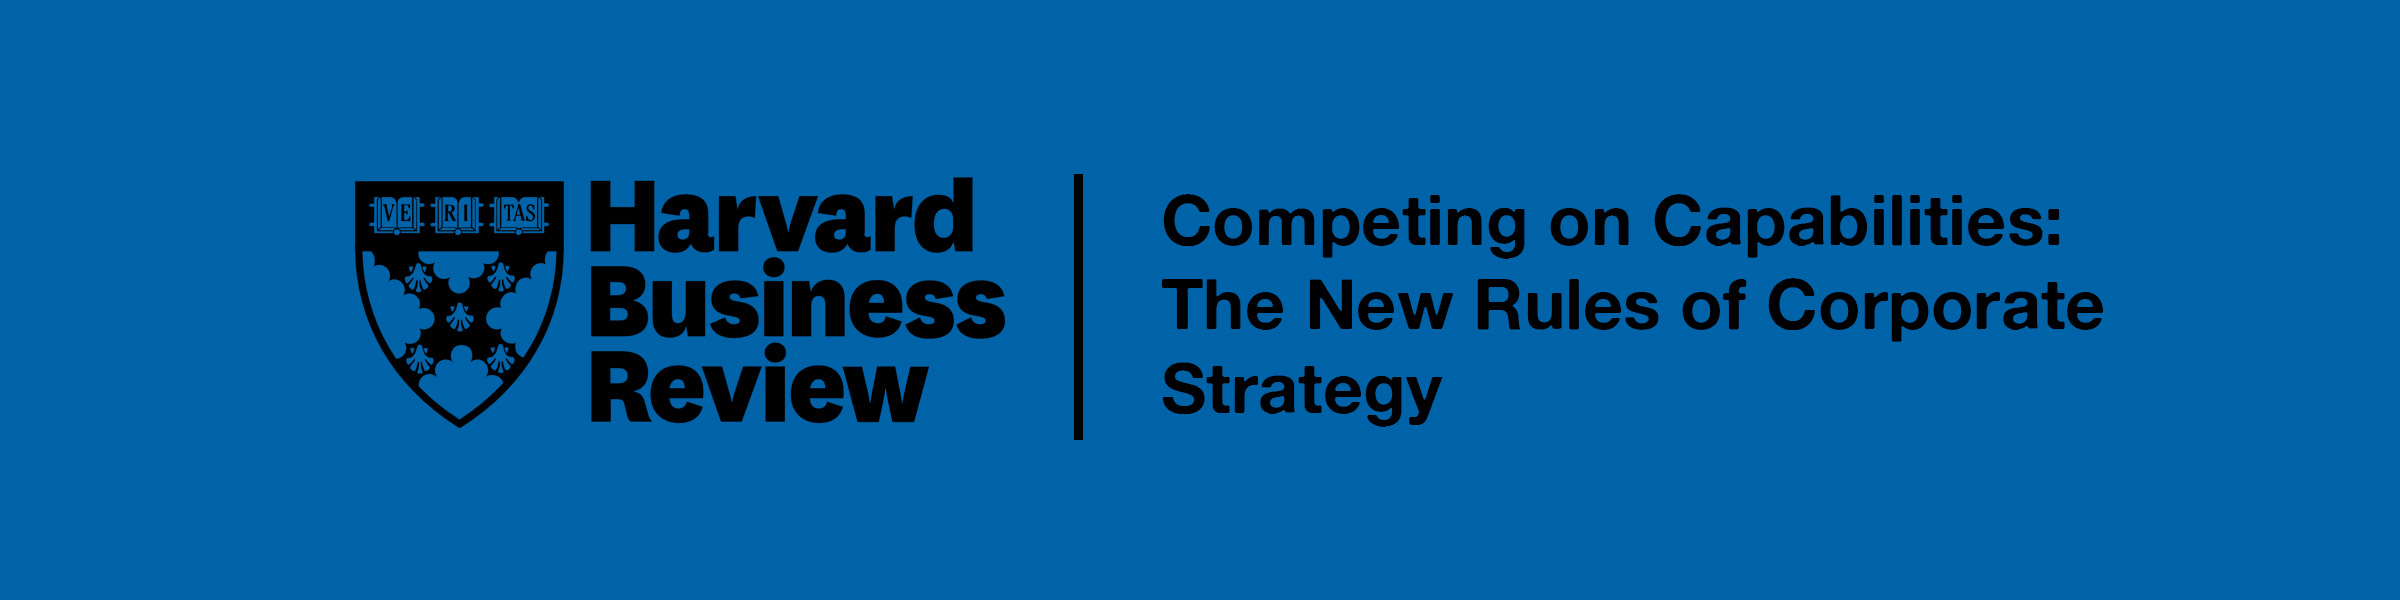 Competing on Capabilities: The New Rules of Corporate Strategy